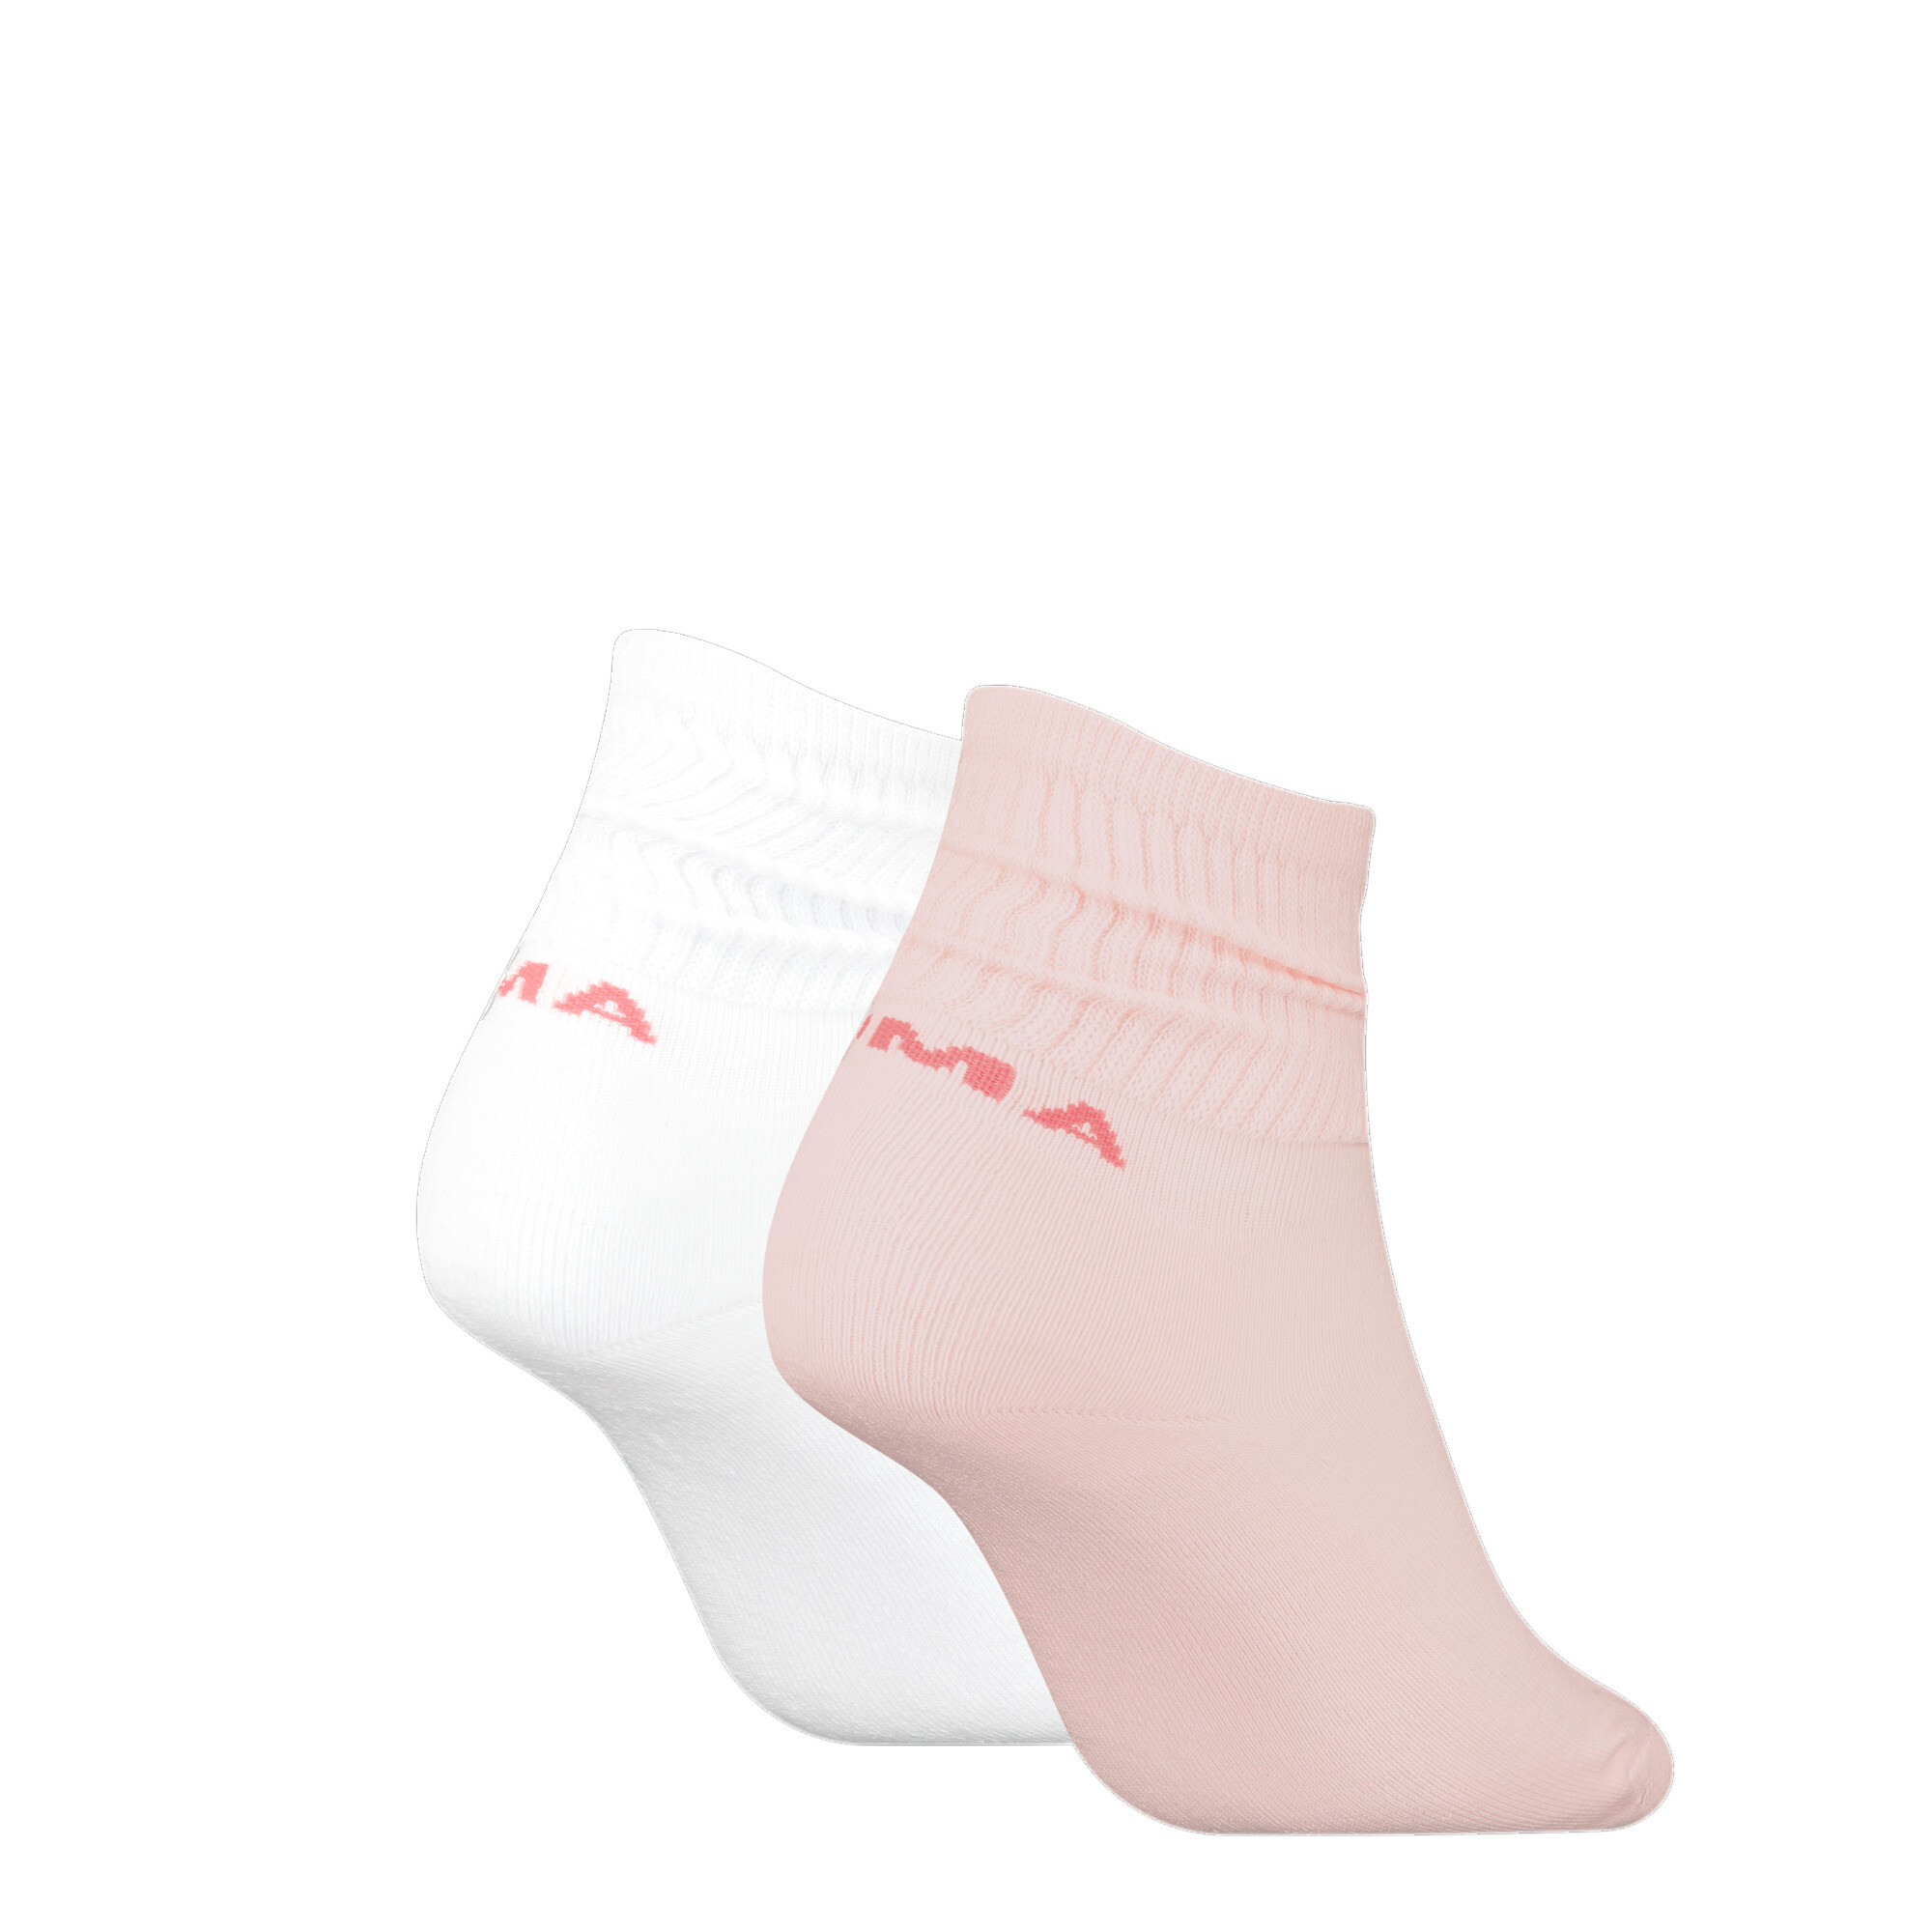 Women's PUMA Slouch Crew Socks 2 Pack In Pink, Size 39-42